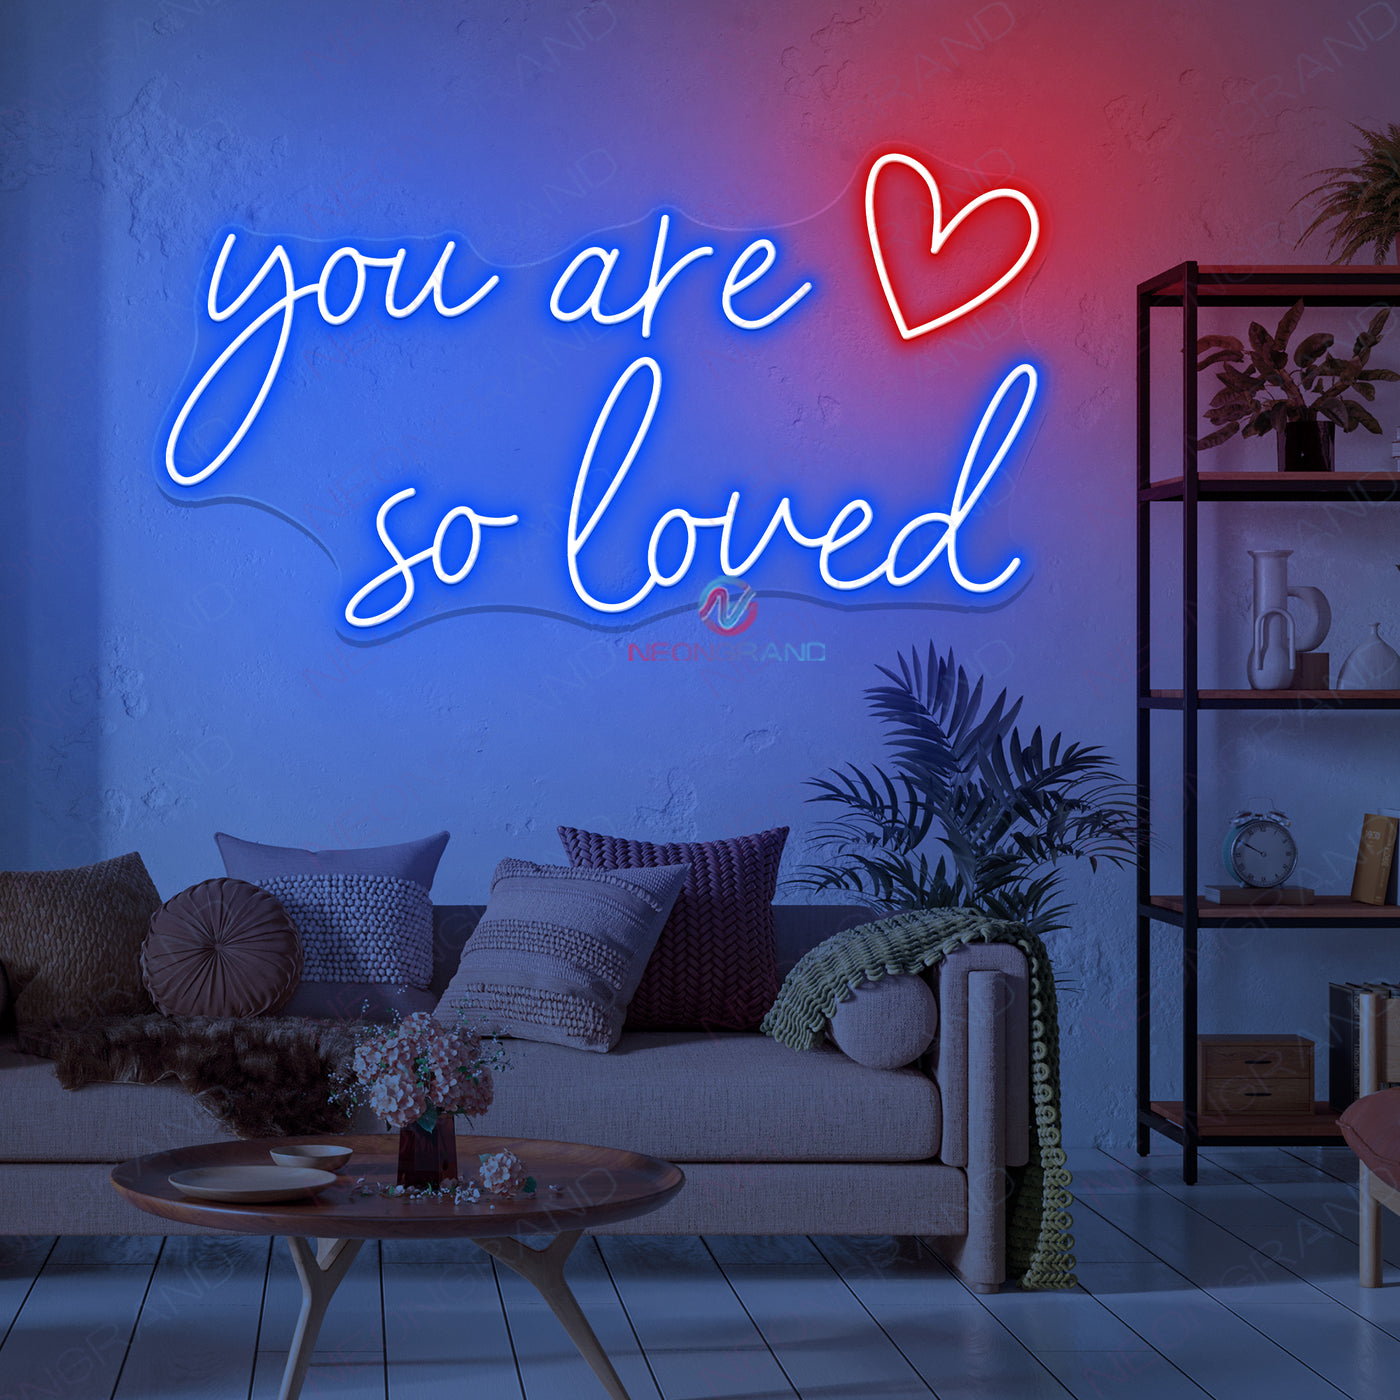 You Are So Loved Neon Sign Word Led Light